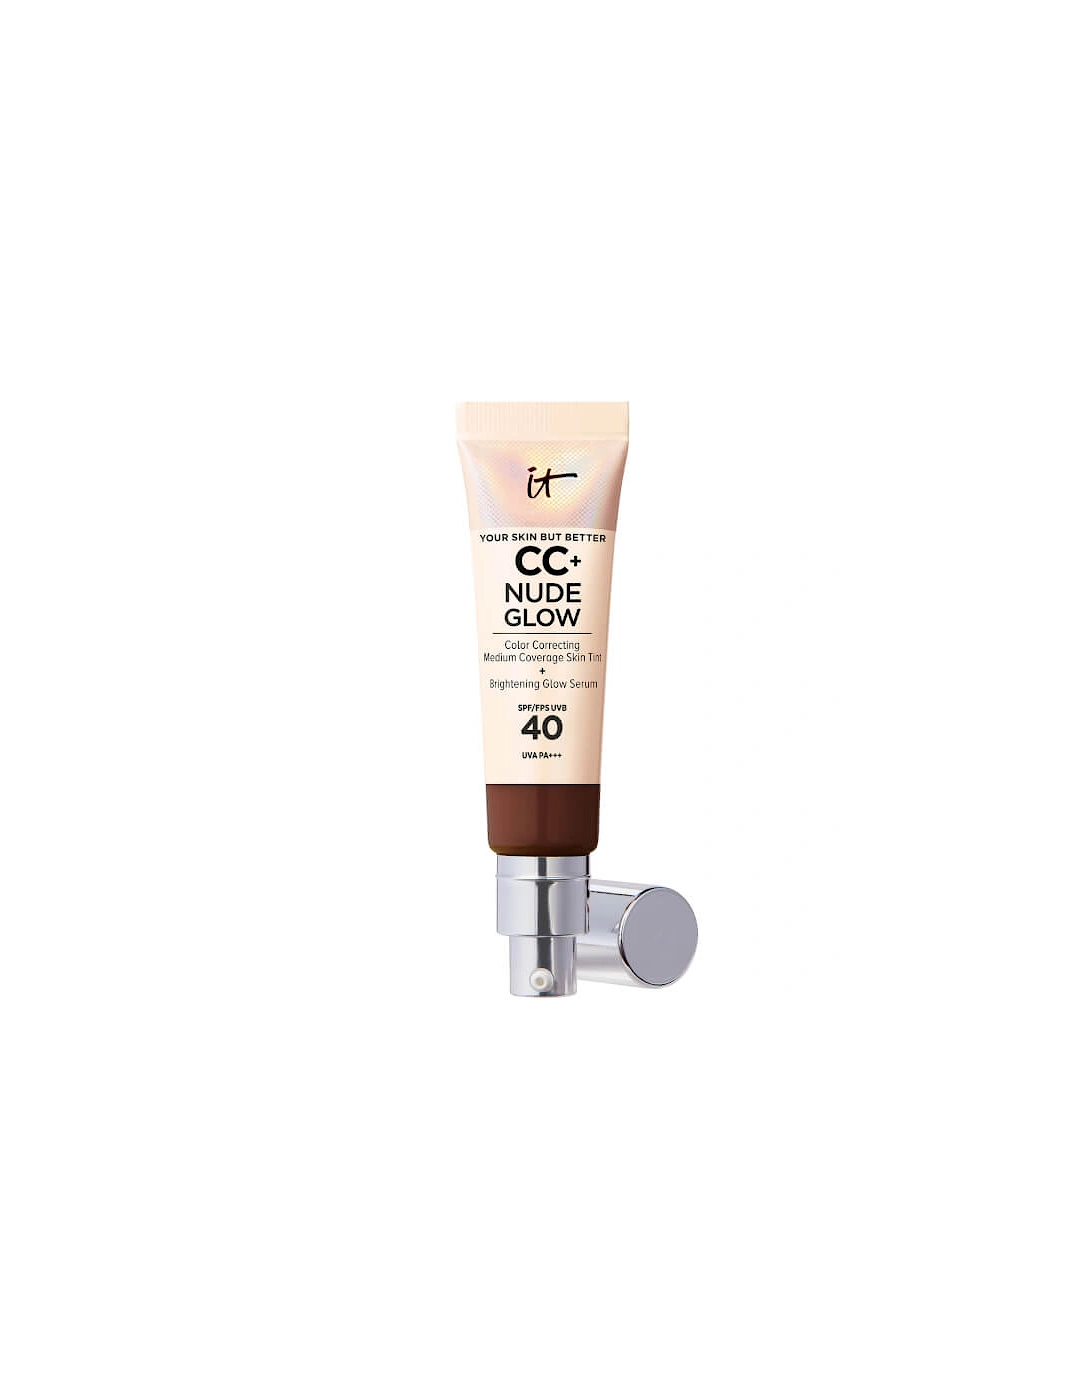 CC+ and Nude Glow Lightweight Foundation and Glow Serum with SPF40 - Deep Bronze, 2 of 1